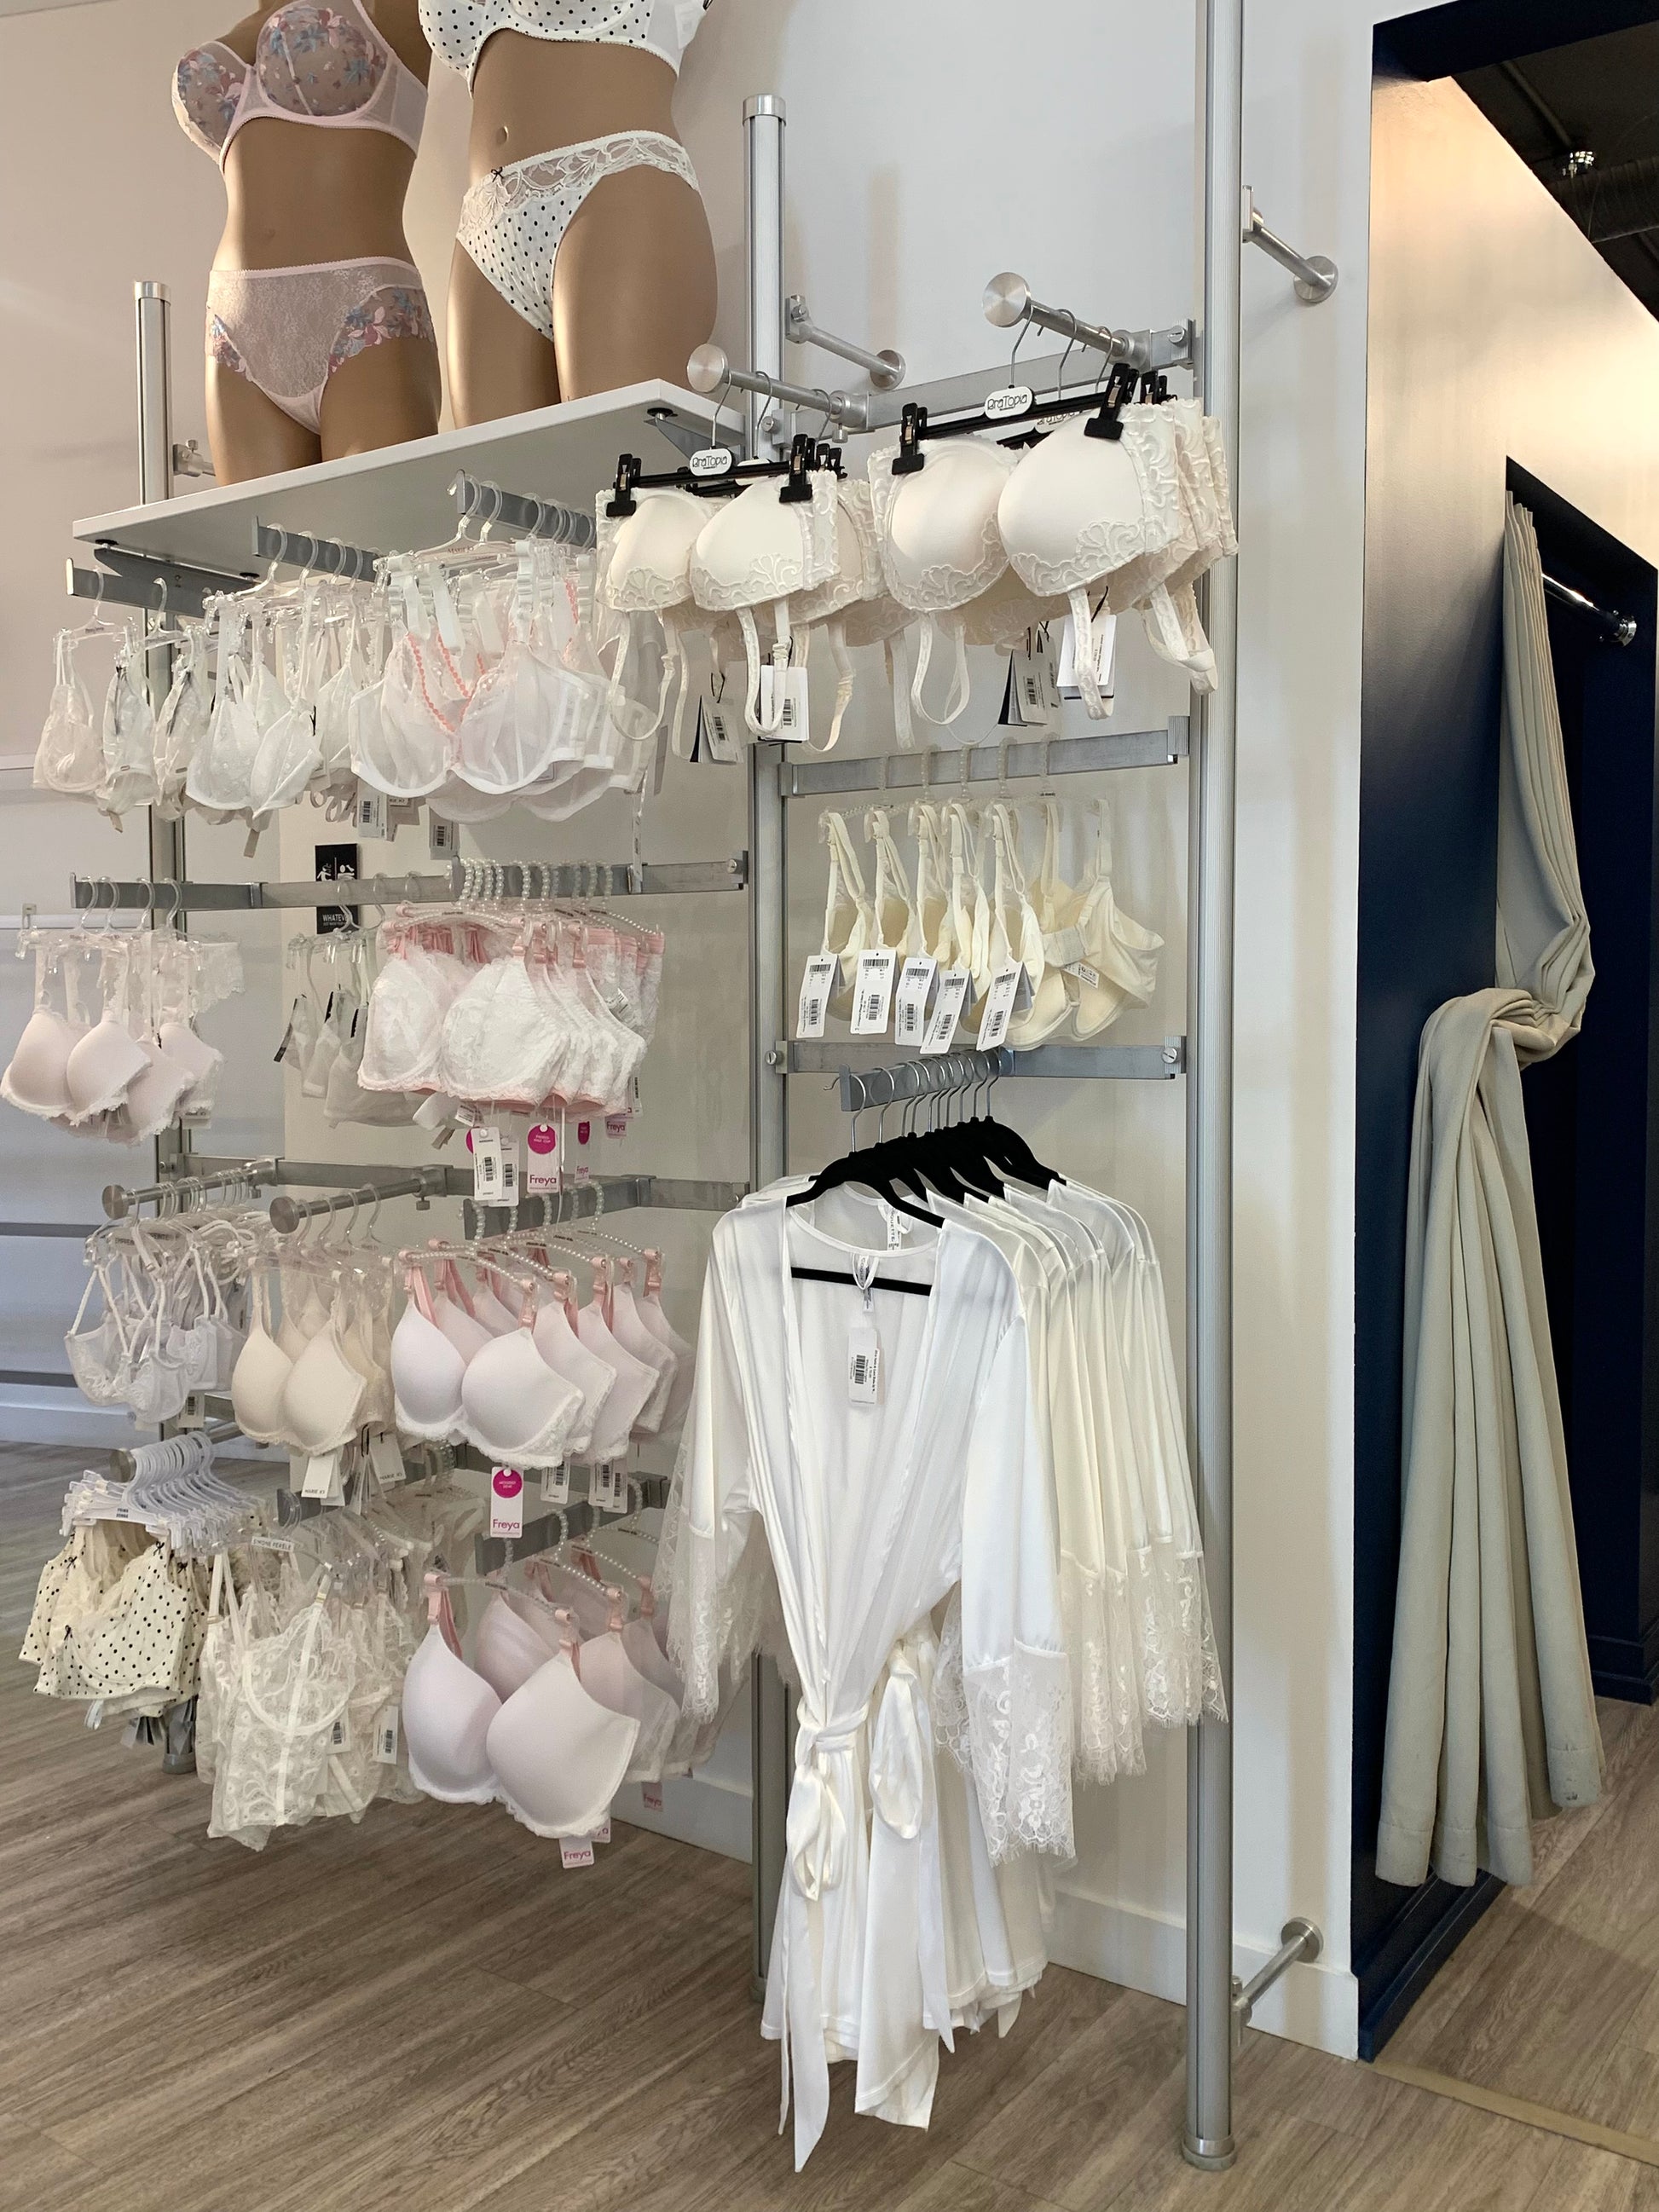 Building a bridal lingerie trousseau—the pieces to buy and rules